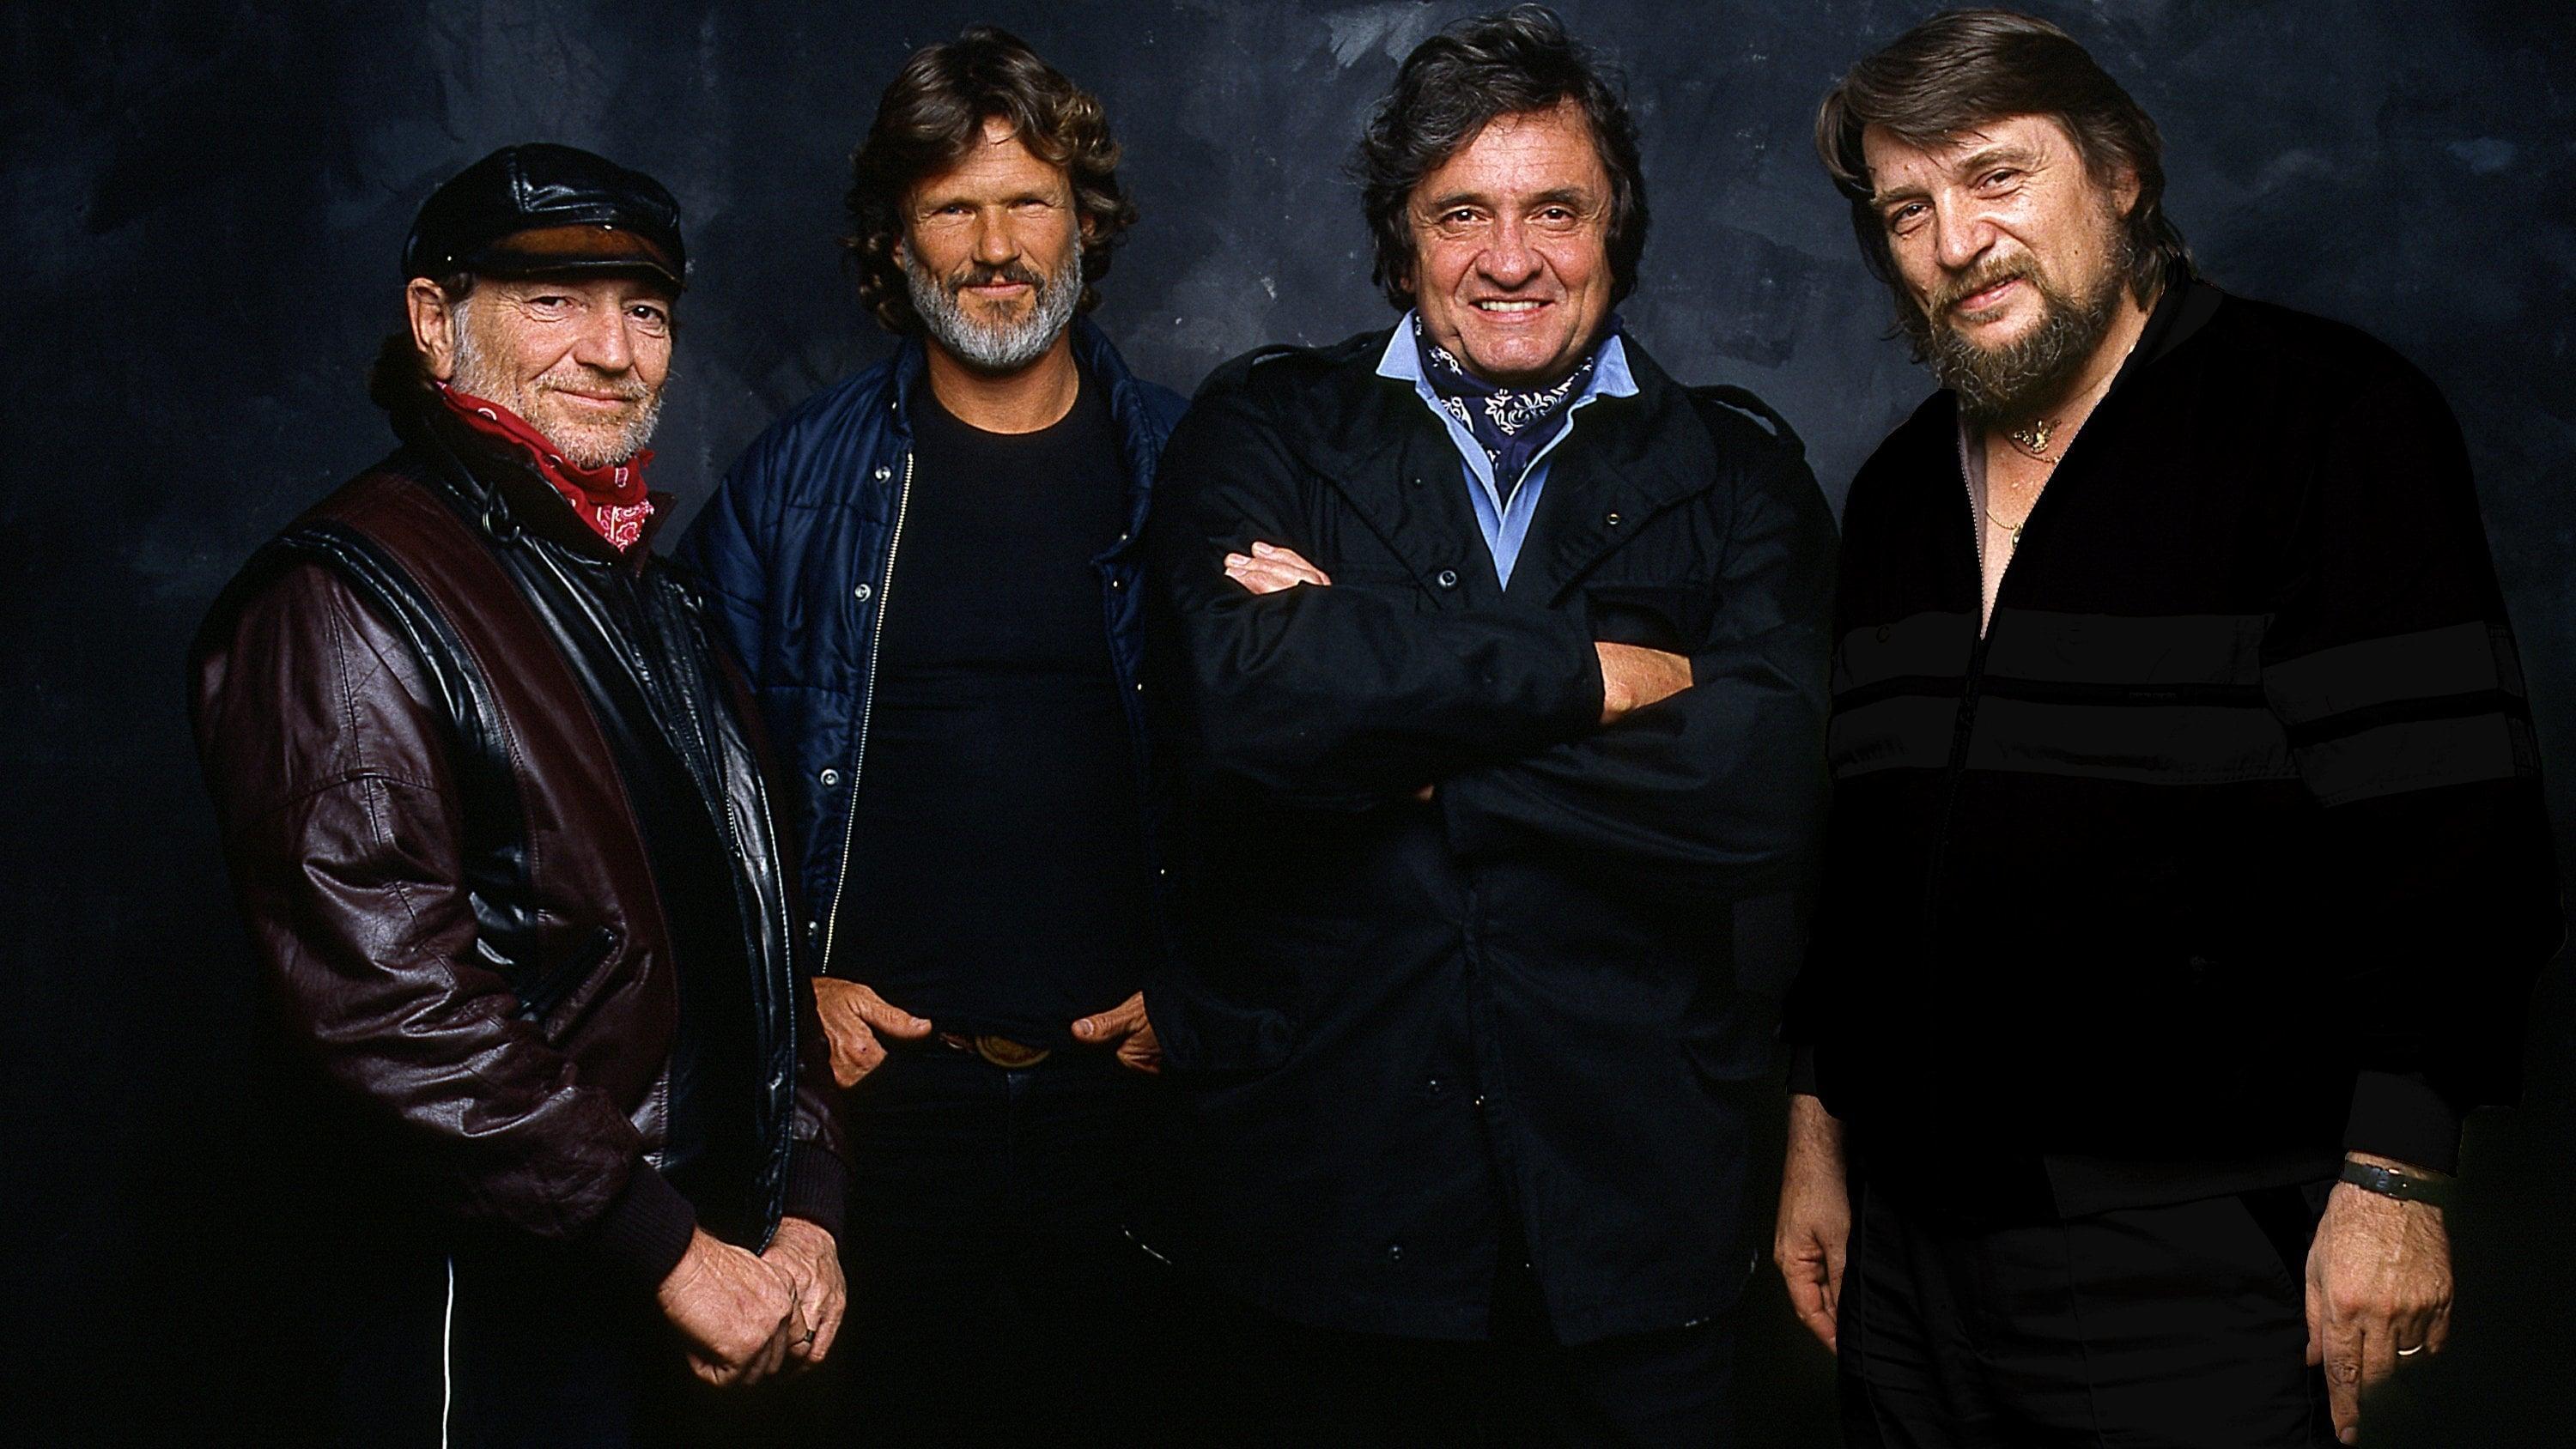 The Highwaymen - Live American Outlaws backdrop